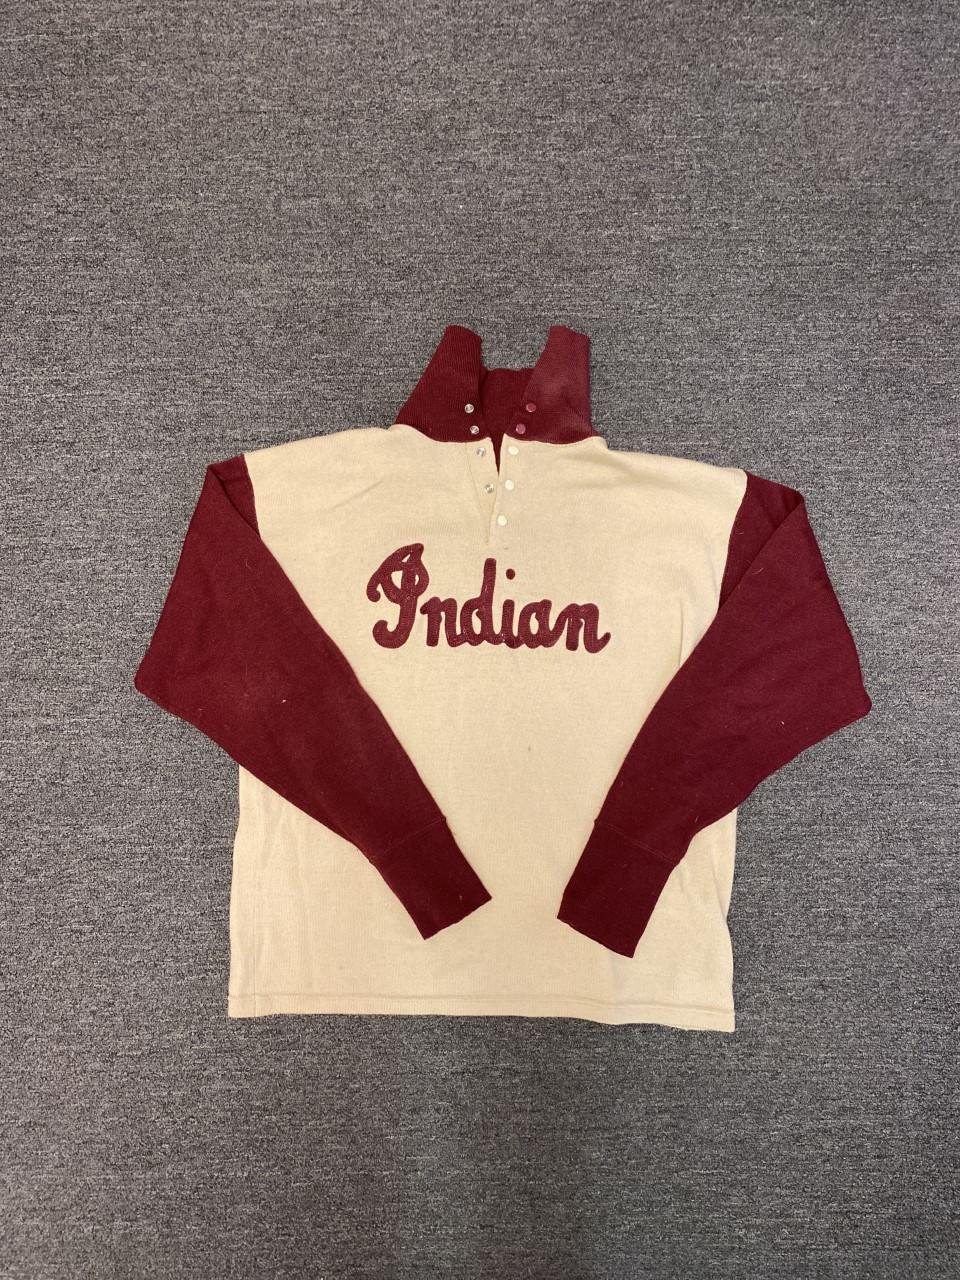 Two Vintage Style Indian Motorcycles Sweaters